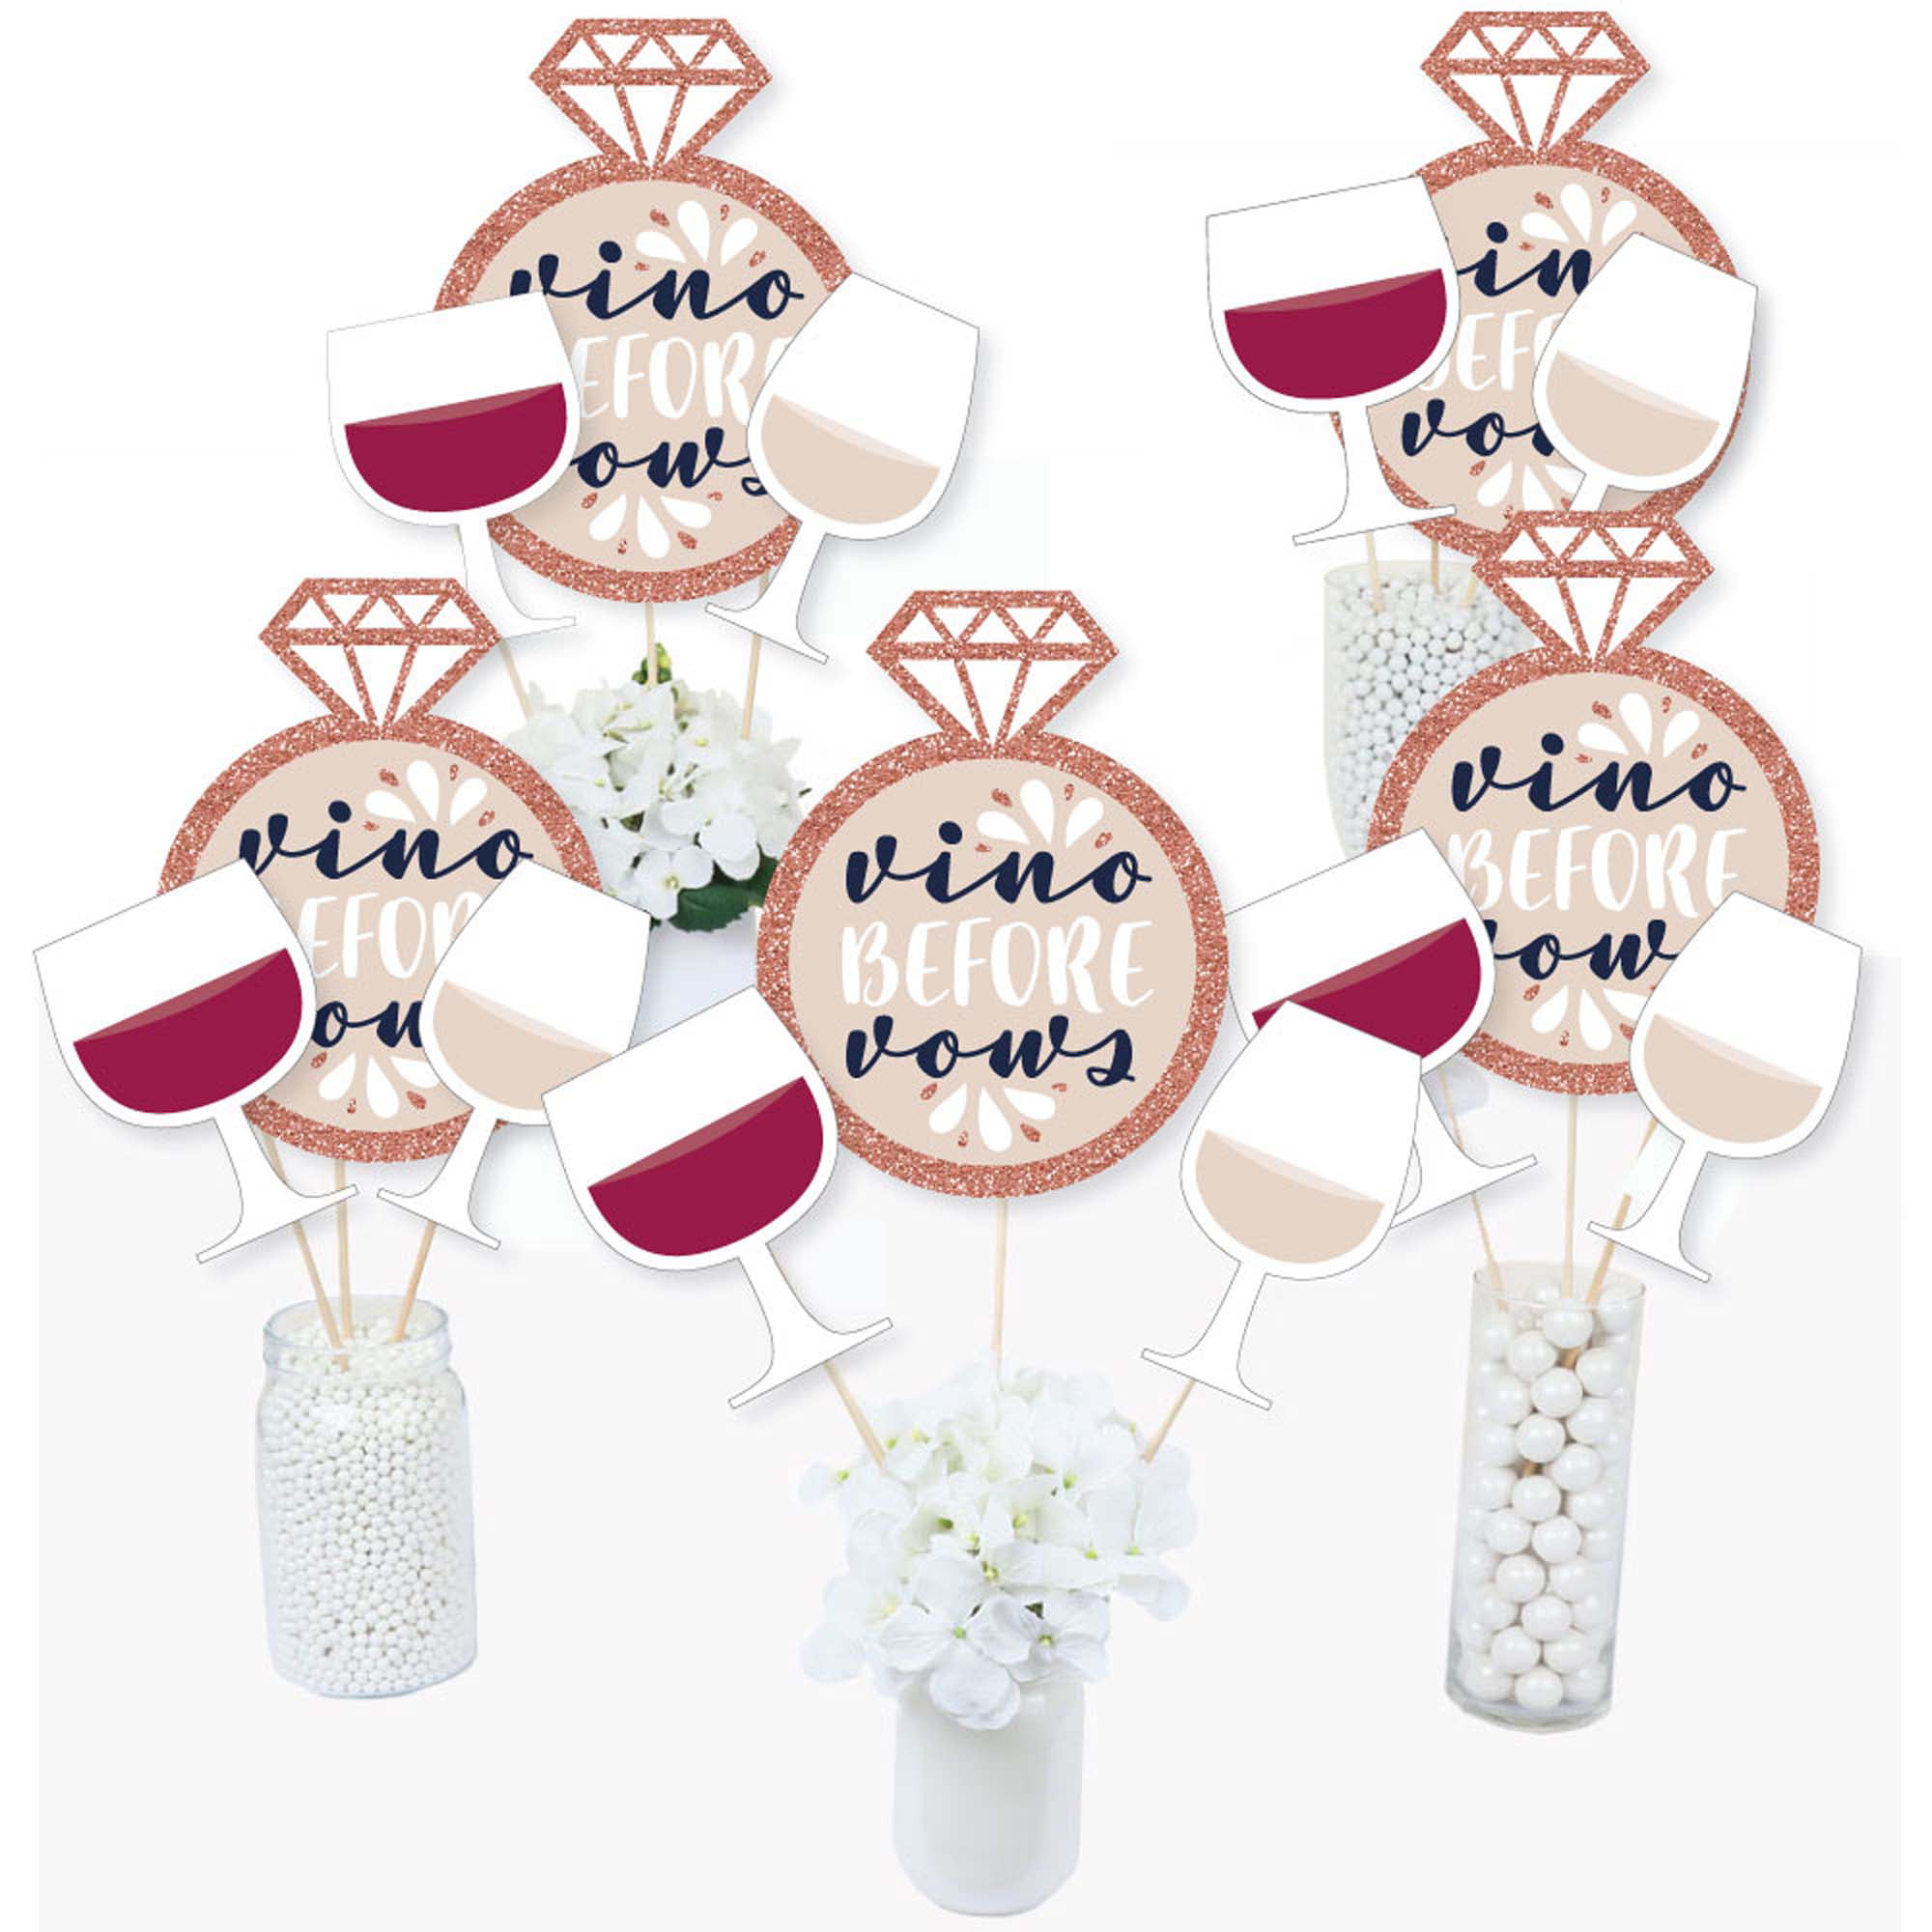 Bride-to-Be - Bridal Shower or Classy Bachelorette Party Centerpiece Sticks  - Table Toppers - Set of 15